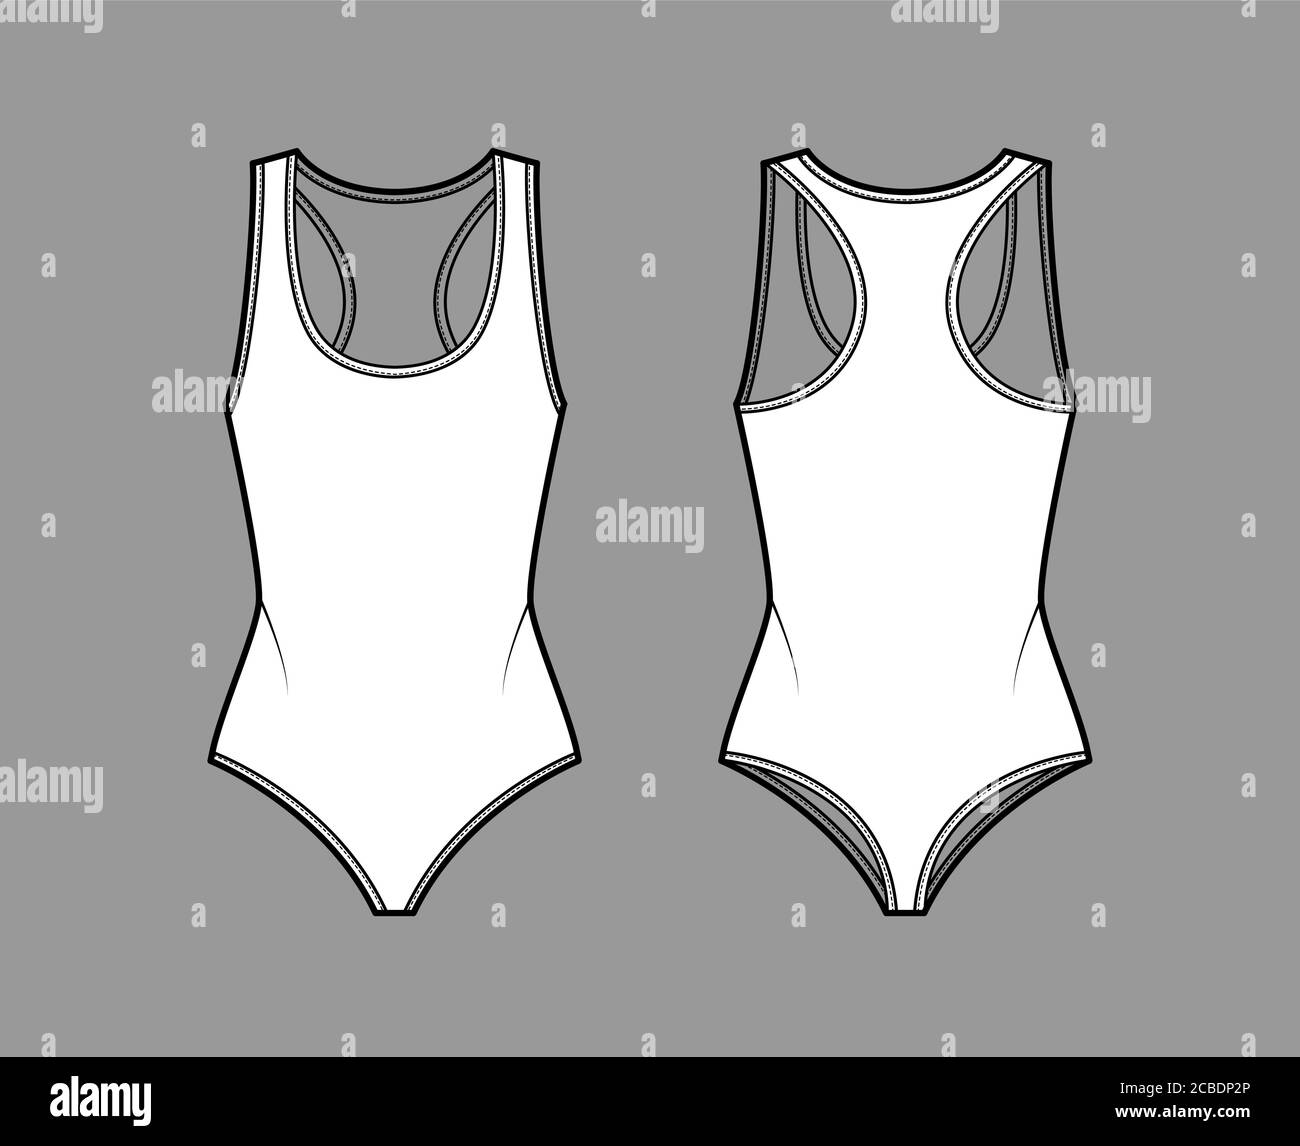 Cotton-jersey thong bodysuit technical fashion illustration with